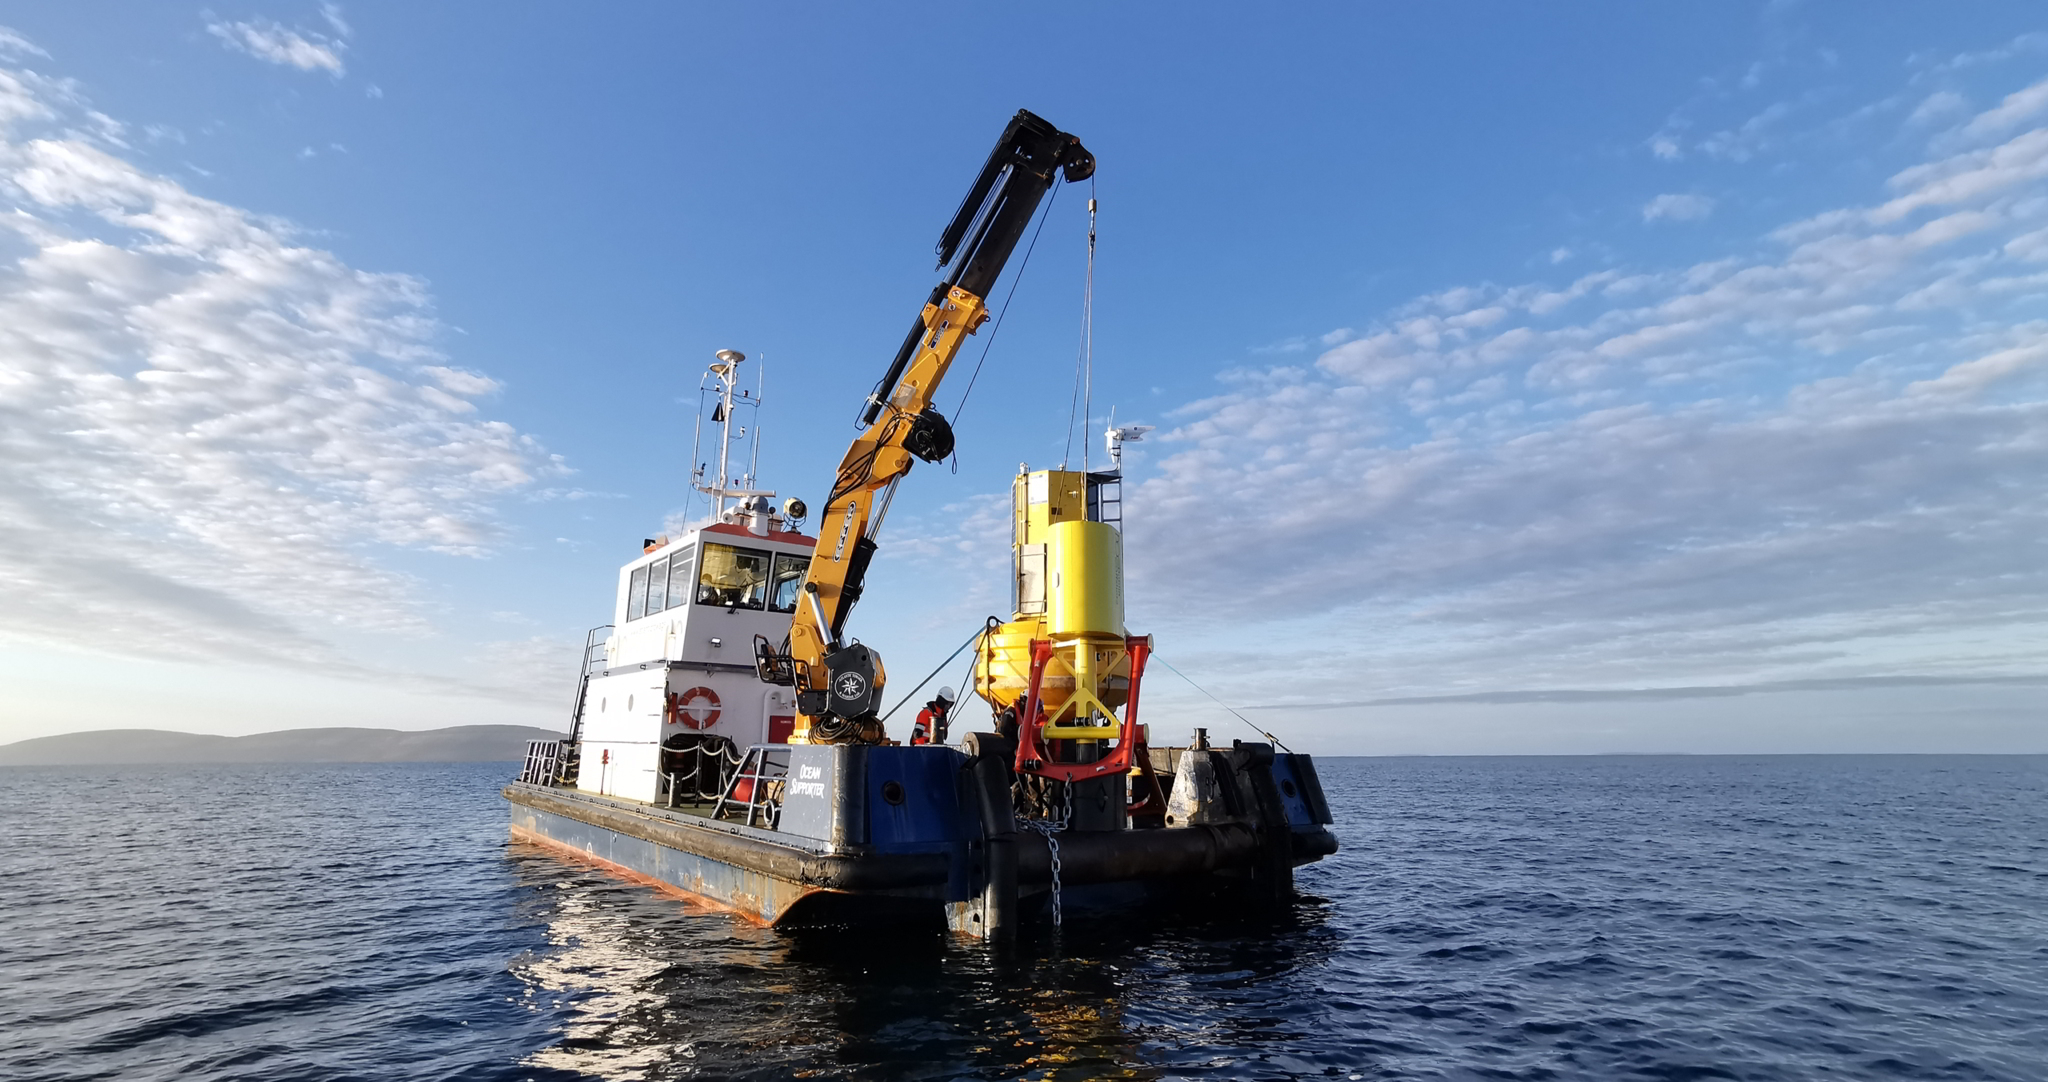 Deployment of Dublin Offshore's mooring LRD device